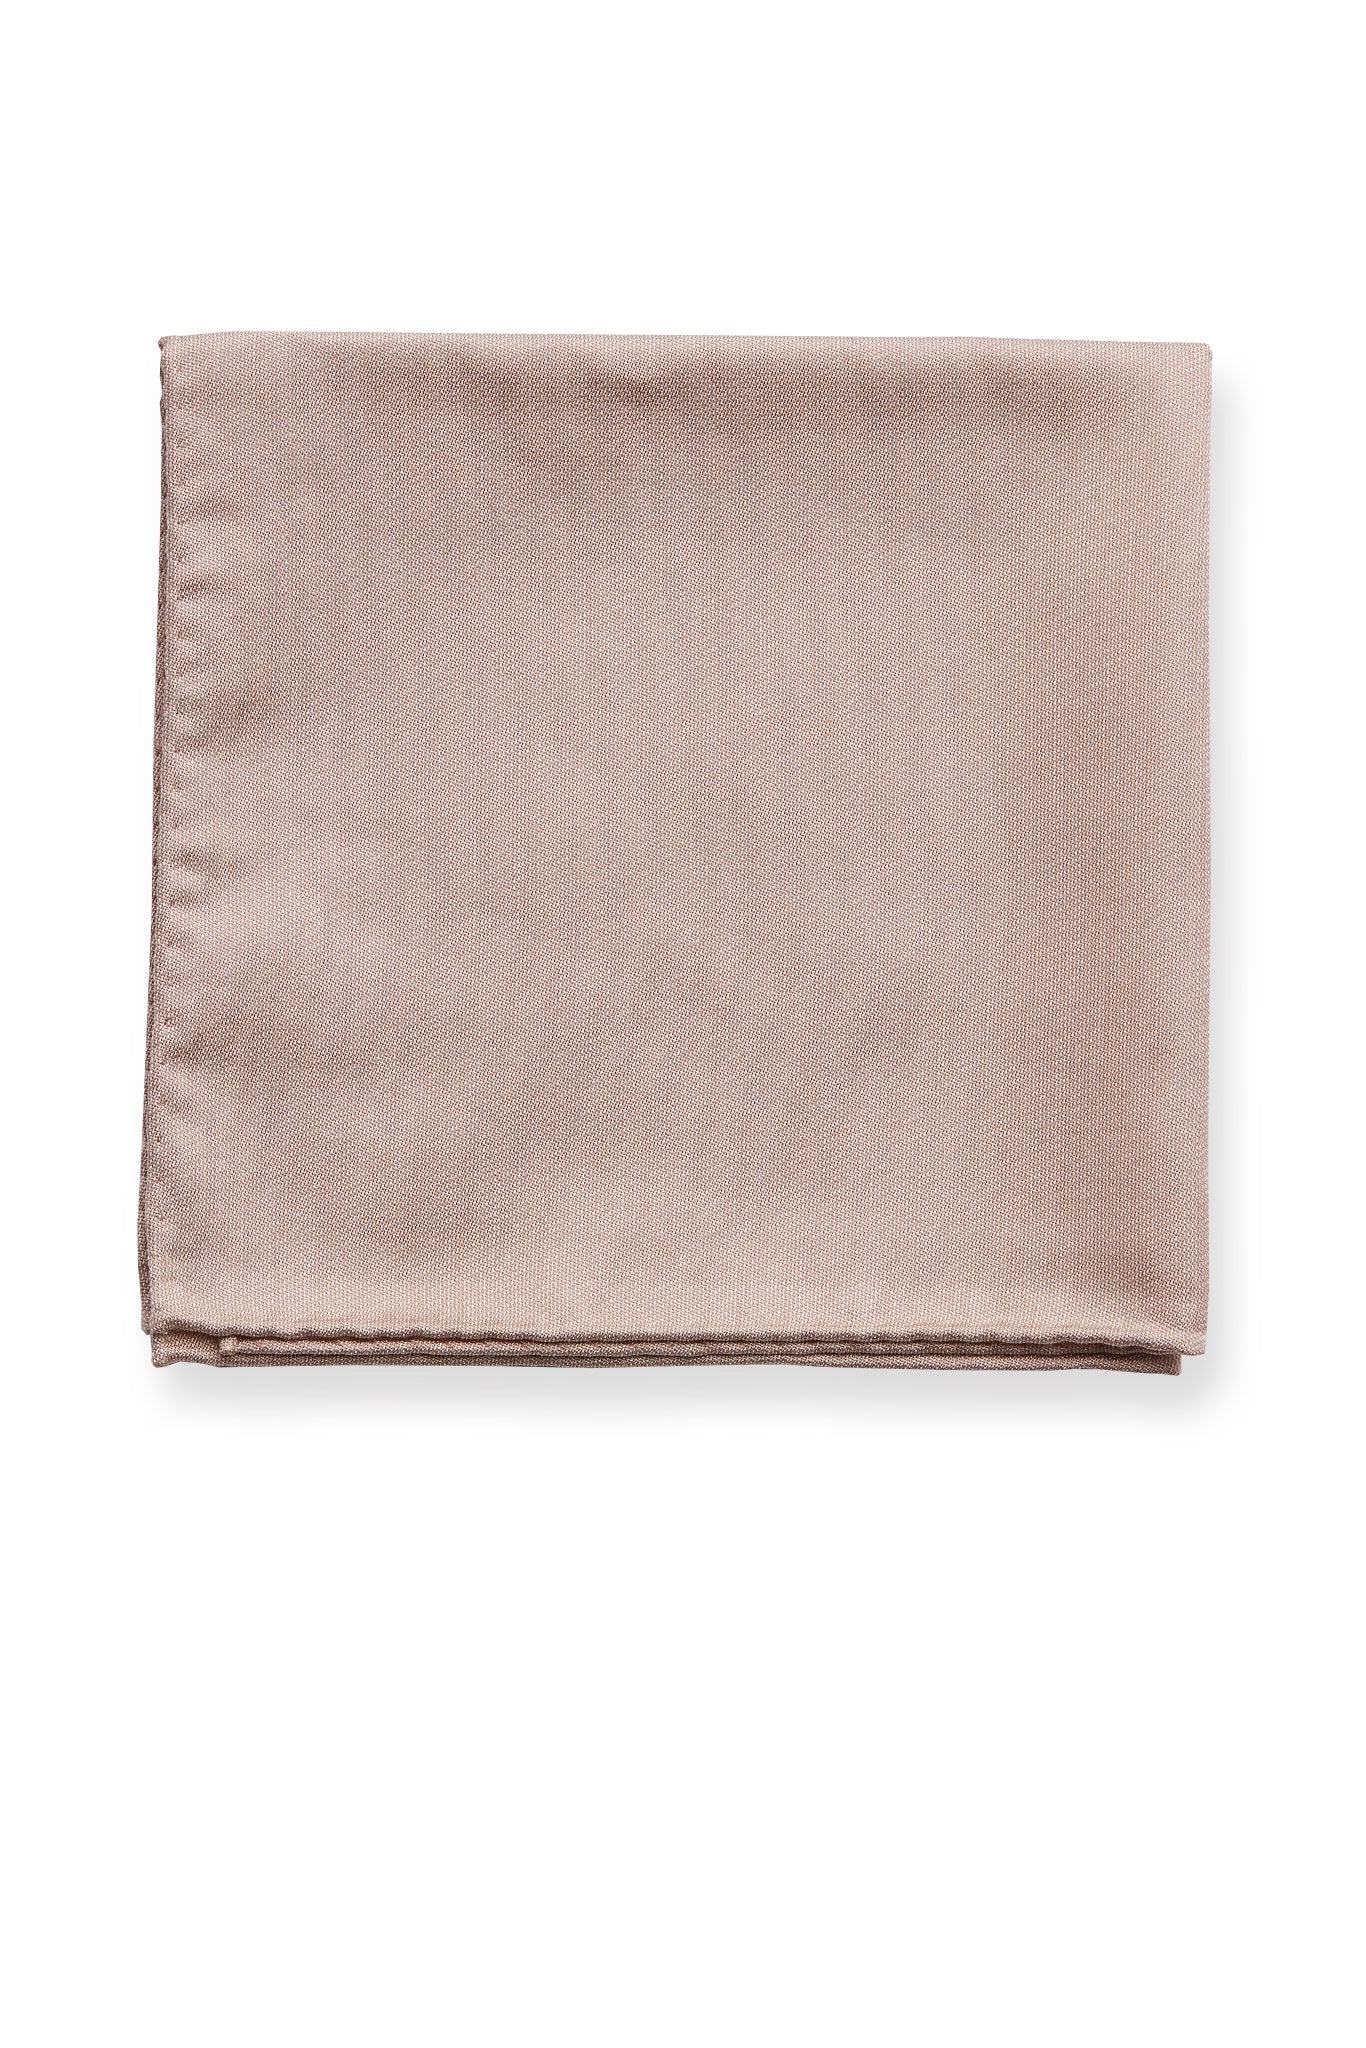 Didi Pocket Square in taupe by Birdy Grey, front view